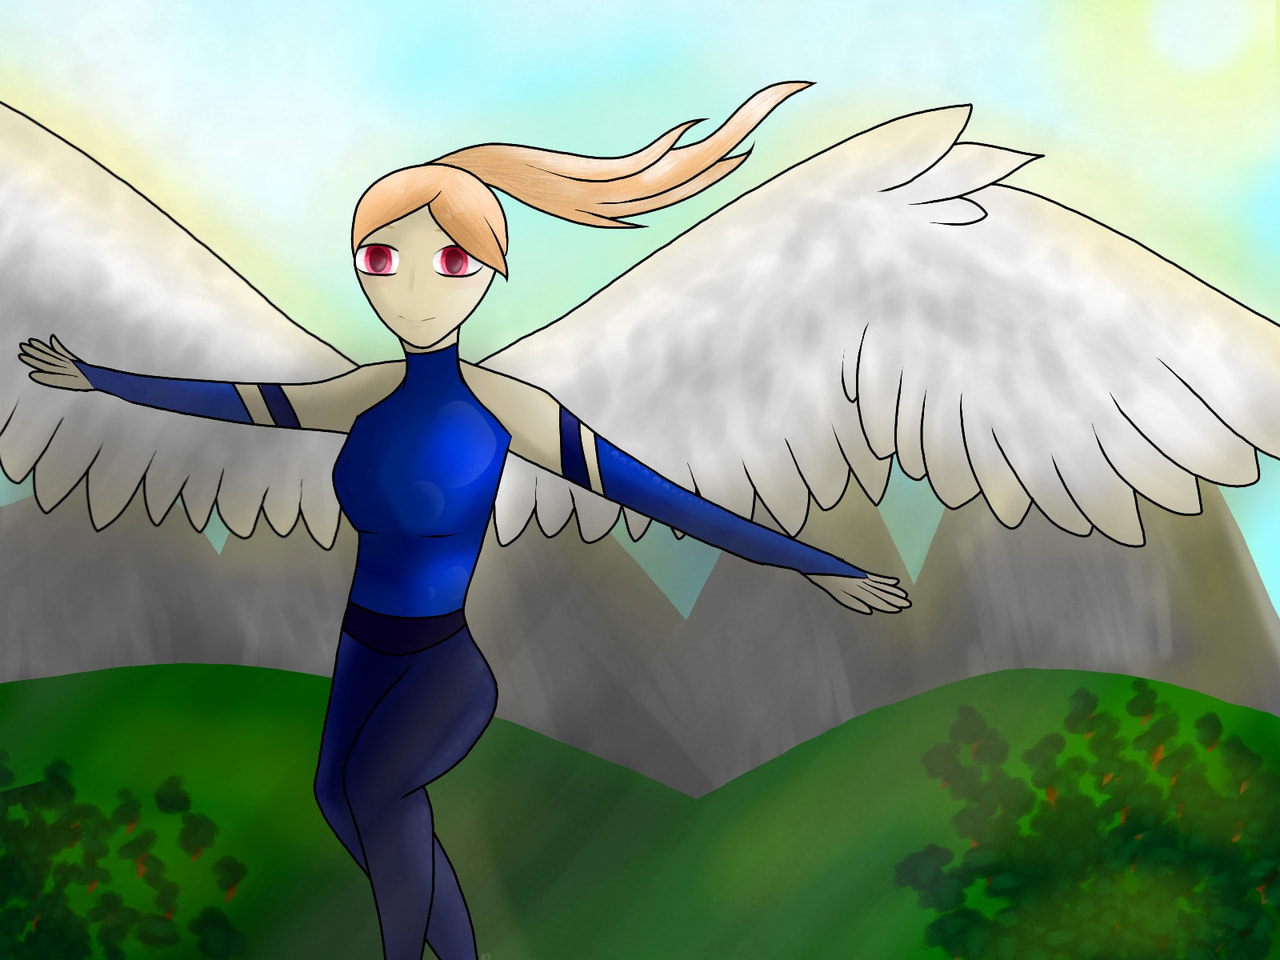 #myhero #fridayswithsketch #Angel #flying She is a hero who will help protect her valley from danger